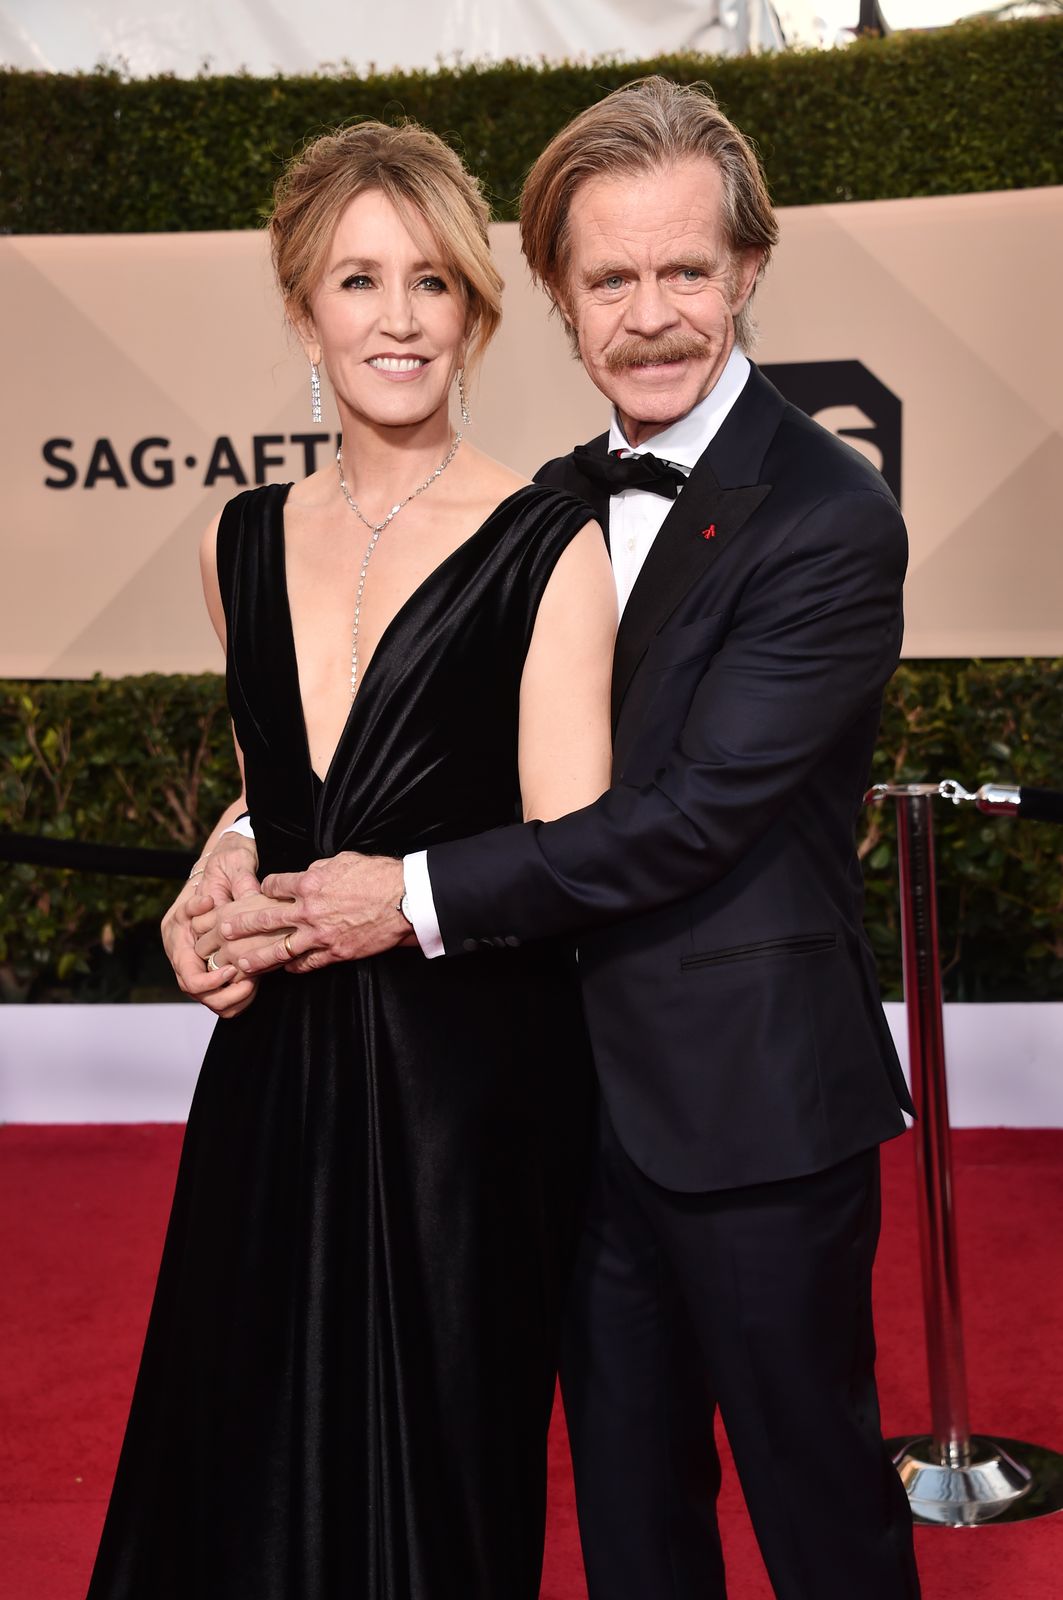 Felicity Huffman and William H. Macy at the 24th Annual Screen Actors Guild Awards on January 21, 2018, in Los Angeles, California | Photo: Alberto E. Rodriguez/Getty Images